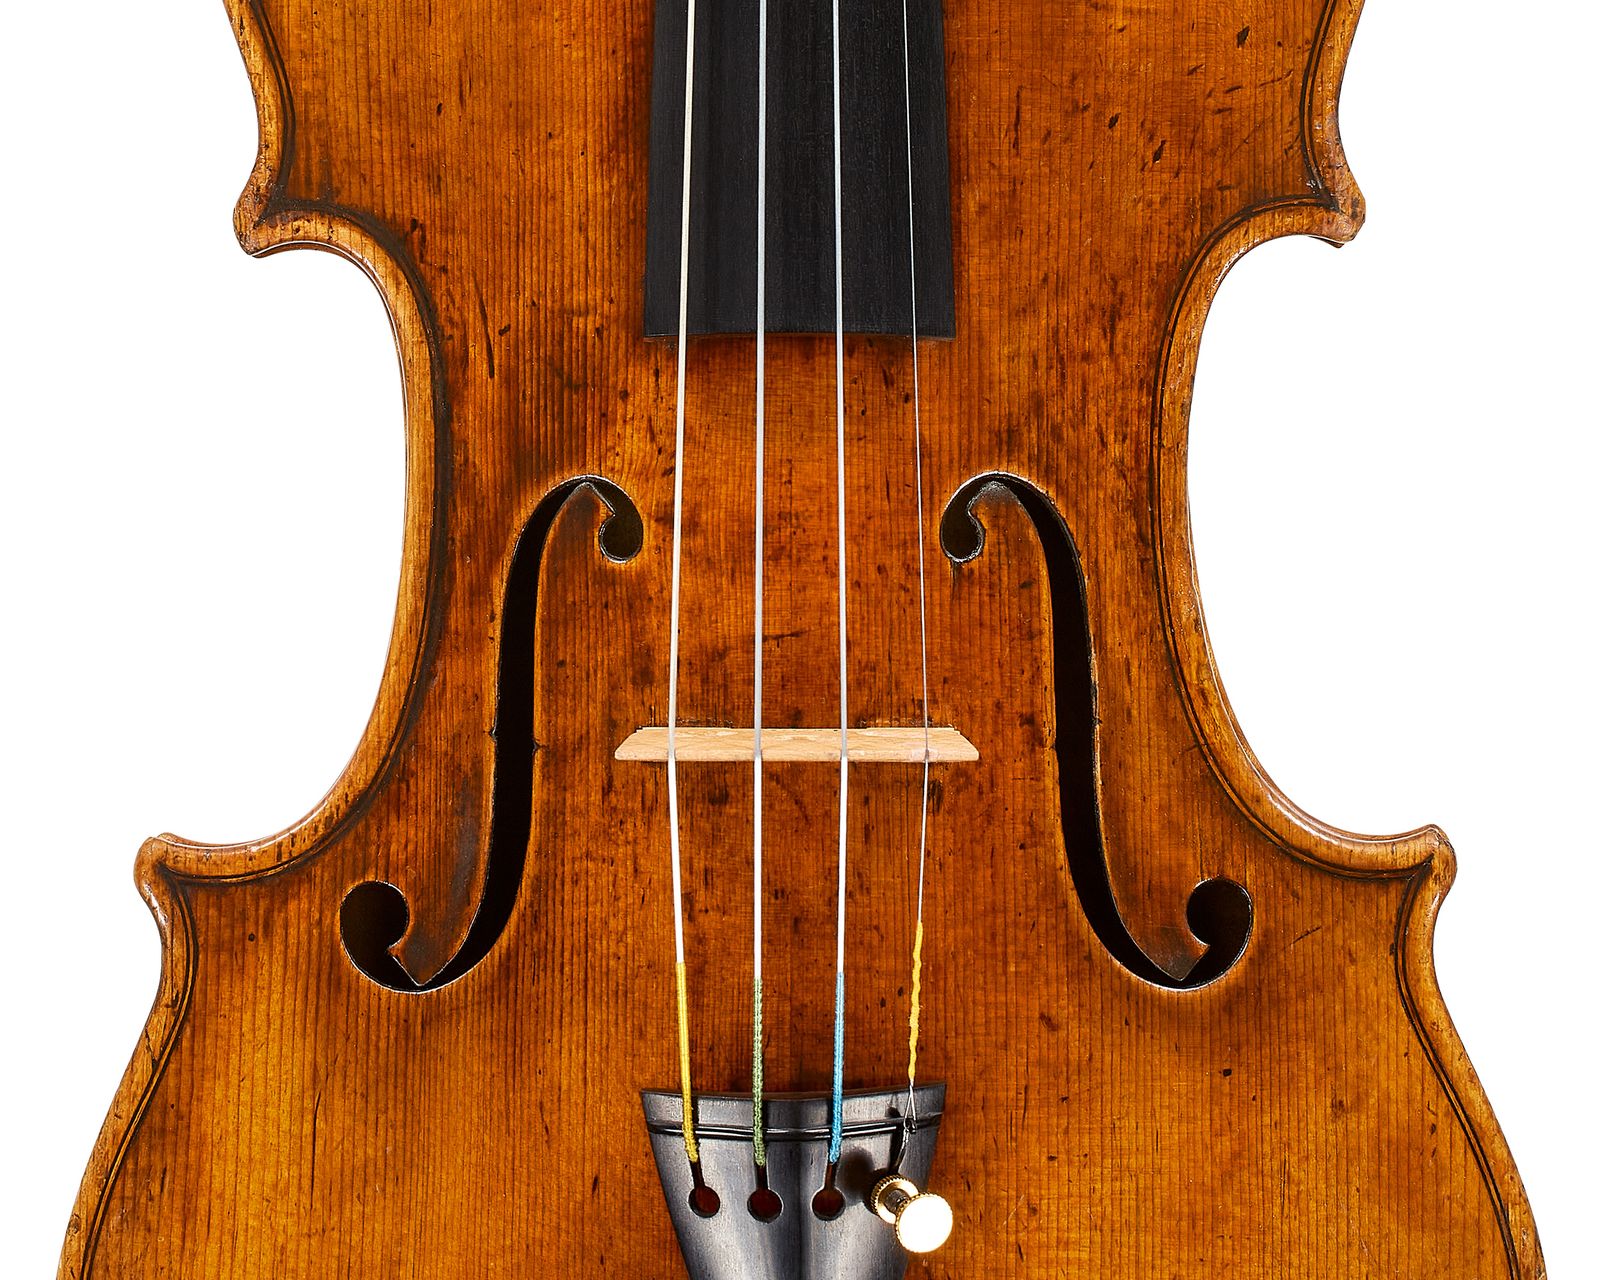 This 308-Year-Old Violin Could Become the Most Ever Sold | Smart News| Smithsonian